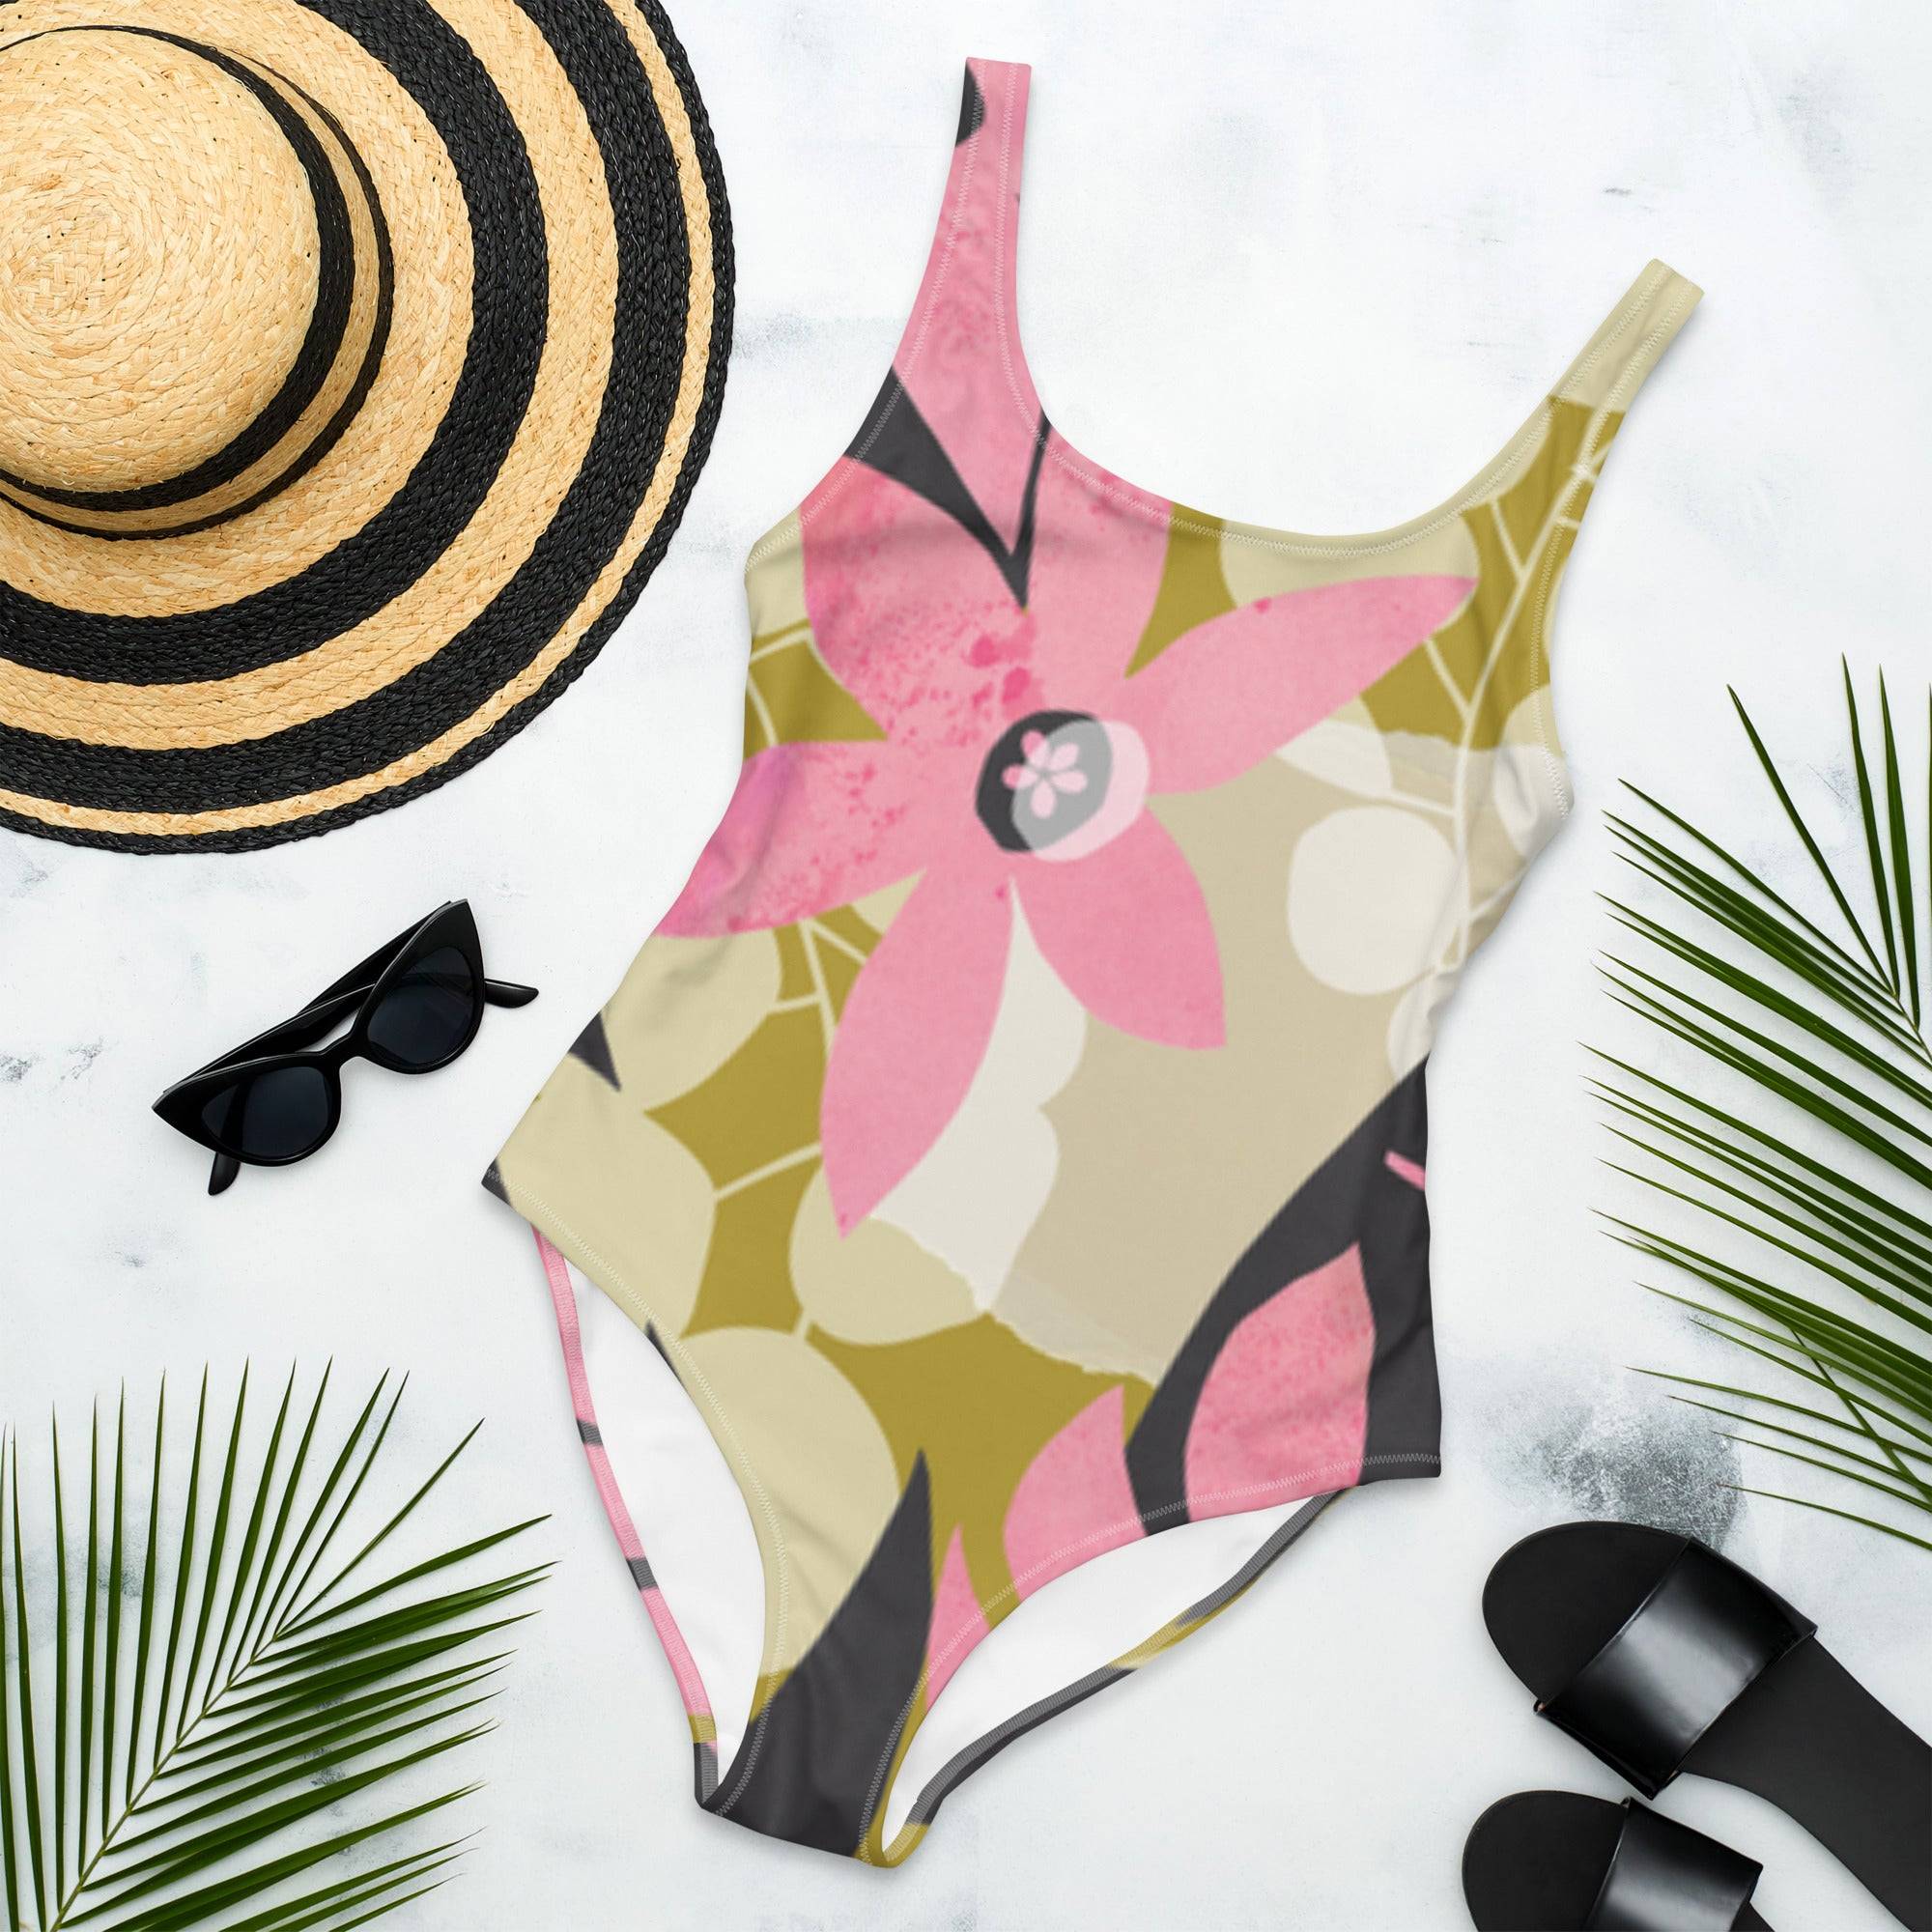 Floral One-Piece Swimsuit | Cheeky One Piece Swimwear - Revive Wear     Cheeky One Piece Swimwear. Floral design with a low back and cheeky cut. Shop Sportswear Accessories for swimsuits, hats, and sports headbands.